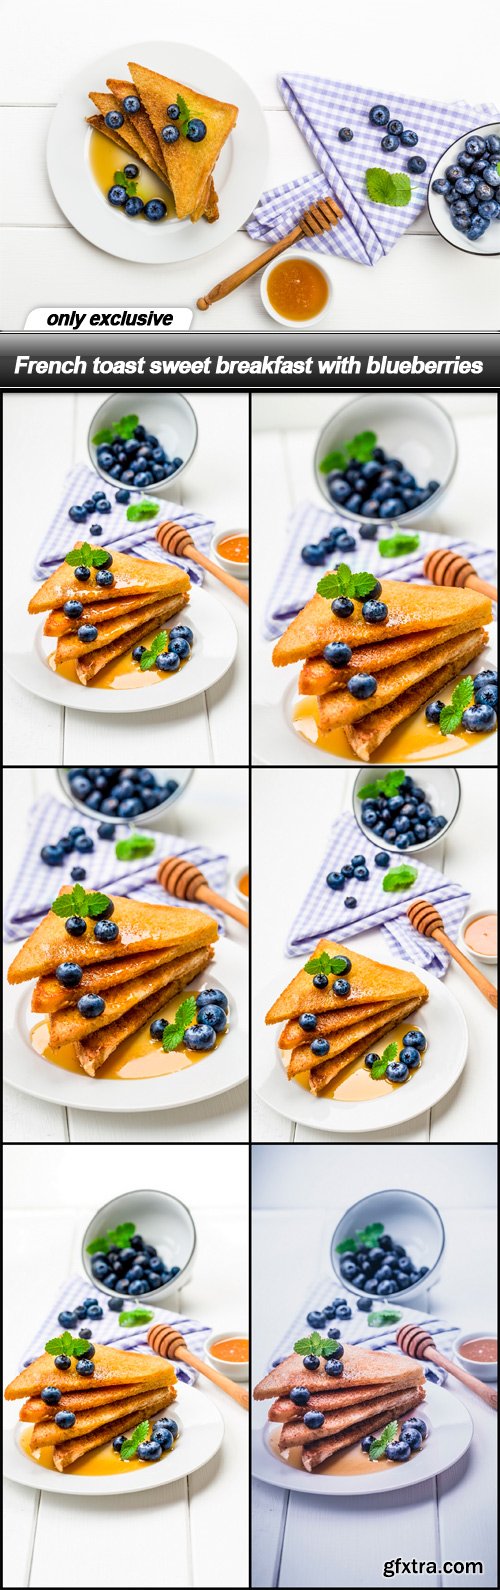 French toast sweet breakfast with blueberries - 7 UHQ JPEG